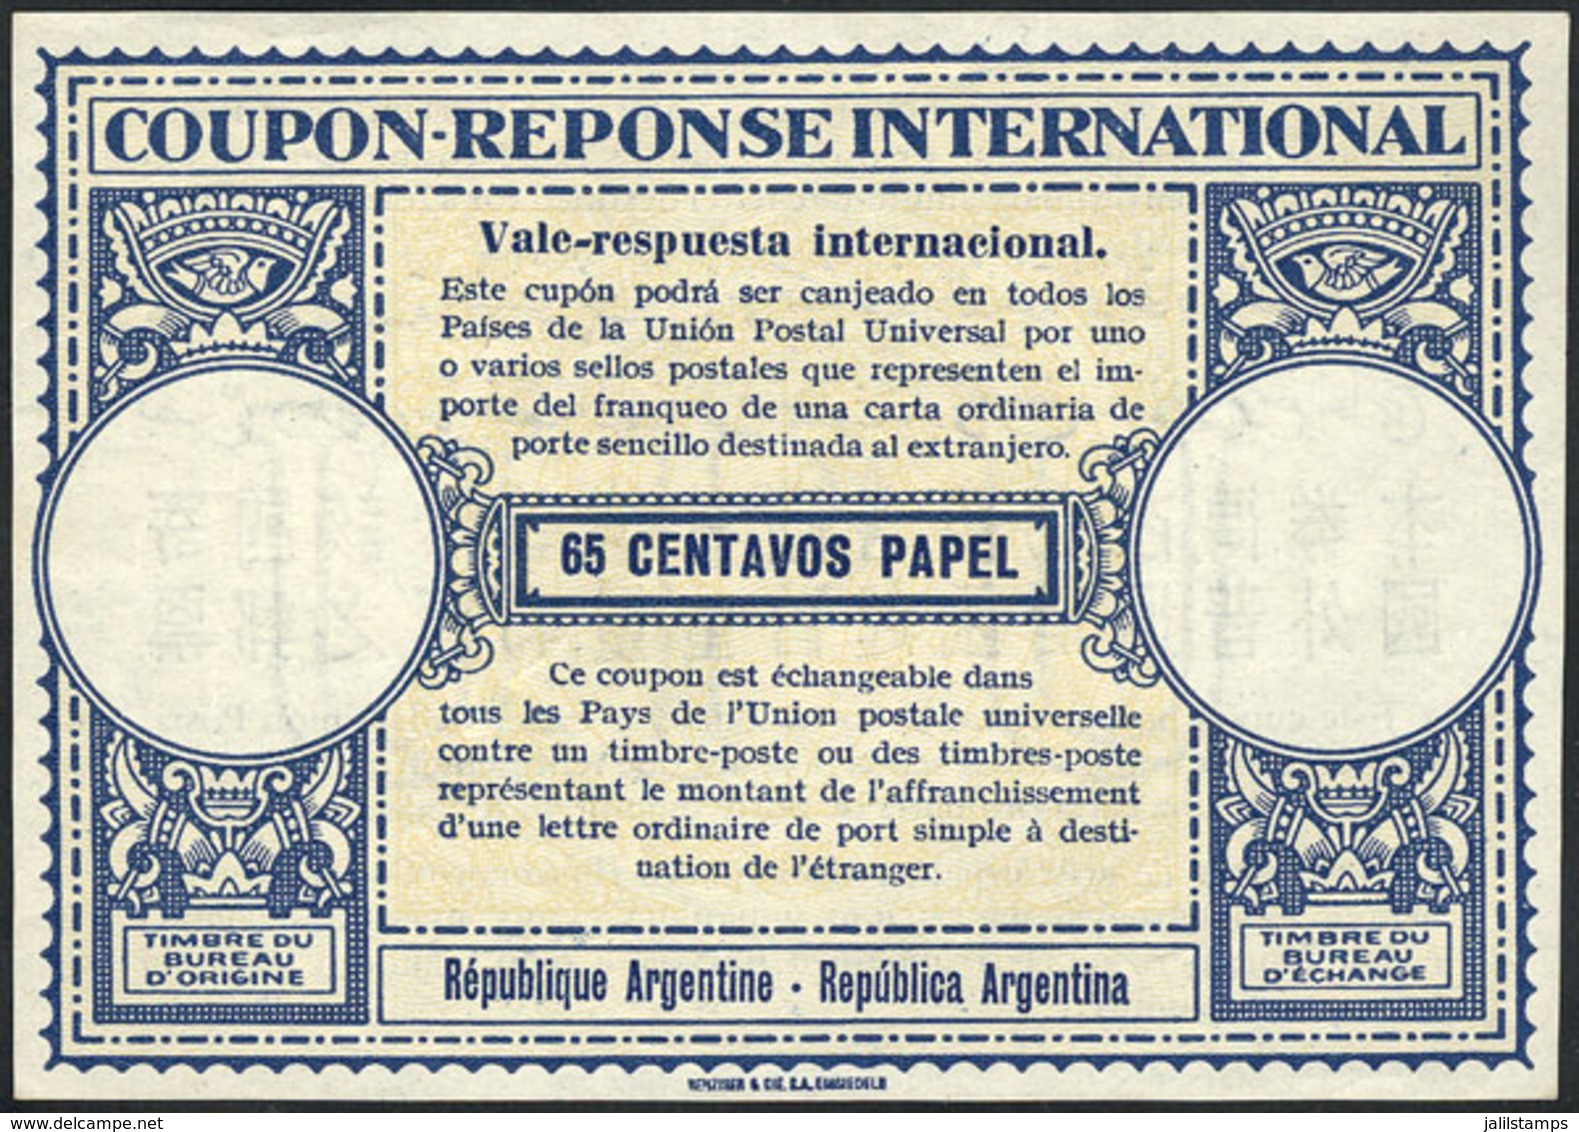 ARGENTINA: International Reply Coupon Of 65c. Papel, Excellent Quality! - Postal Stationery